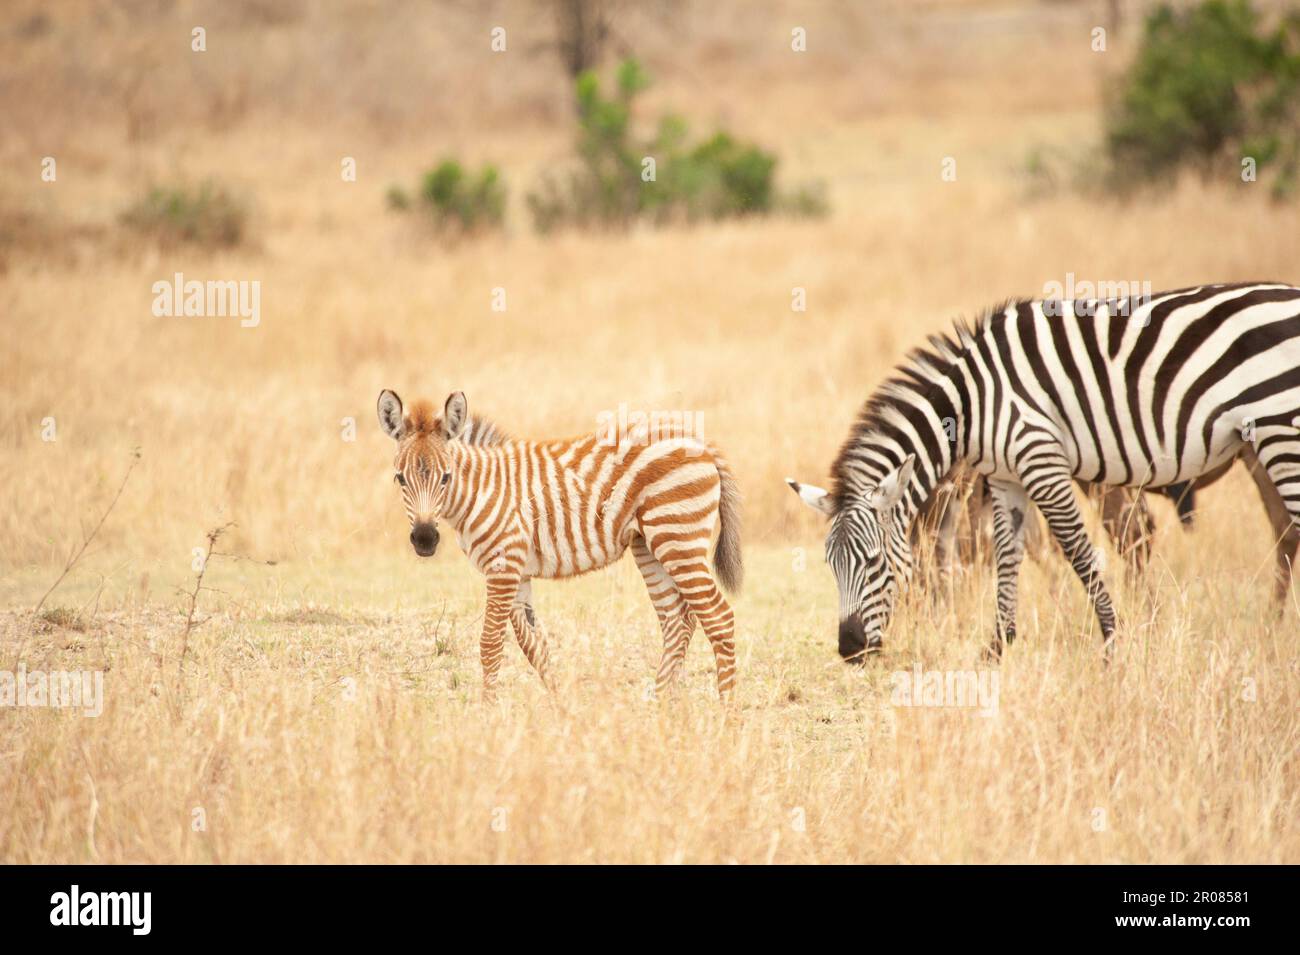 Zebra foal, Serengeti National Park. Zebra foals are often born with brown and white stripes that darken with age. Stock Photo